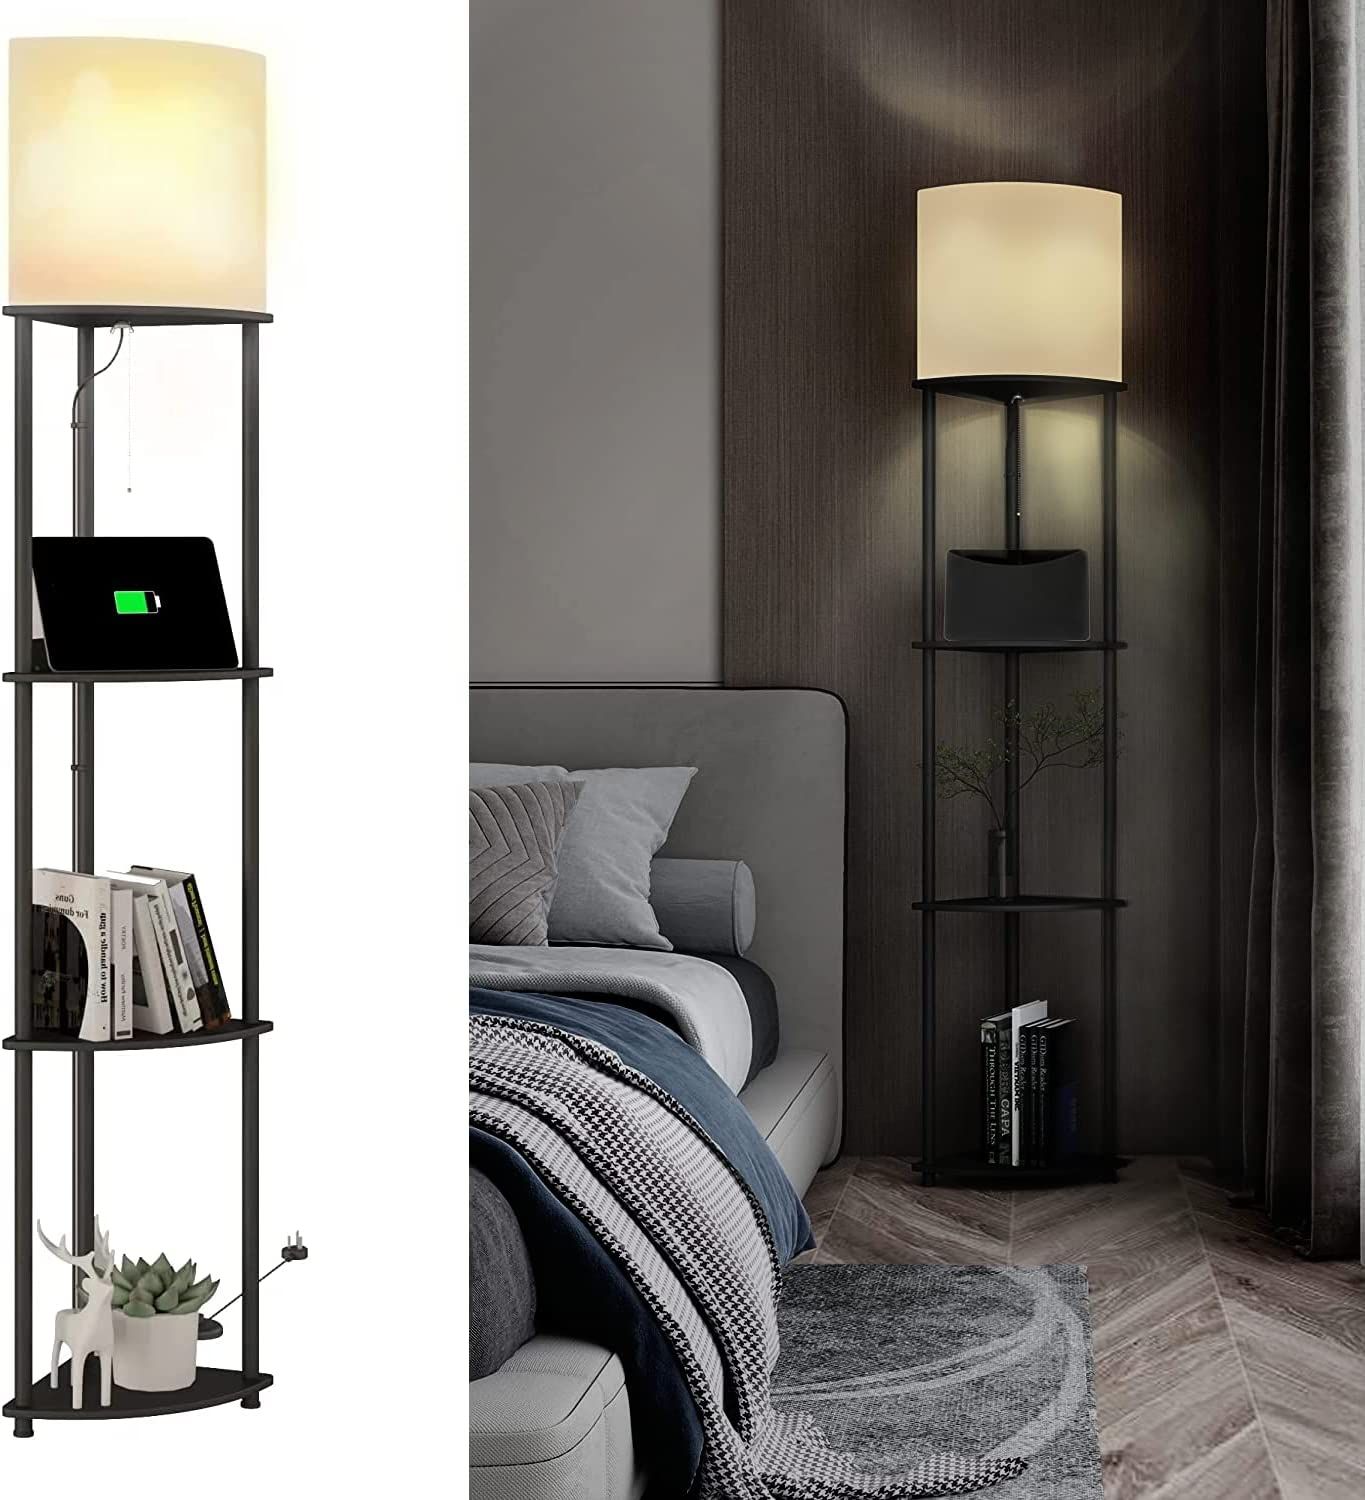 Floor Lamp With Shelves Pull Chain Corner Shelf Floor Lamps With 2 Usb Fast  | Ebay Throughout Floor Lamps With Dual Pull Chains (View 10 of 15)